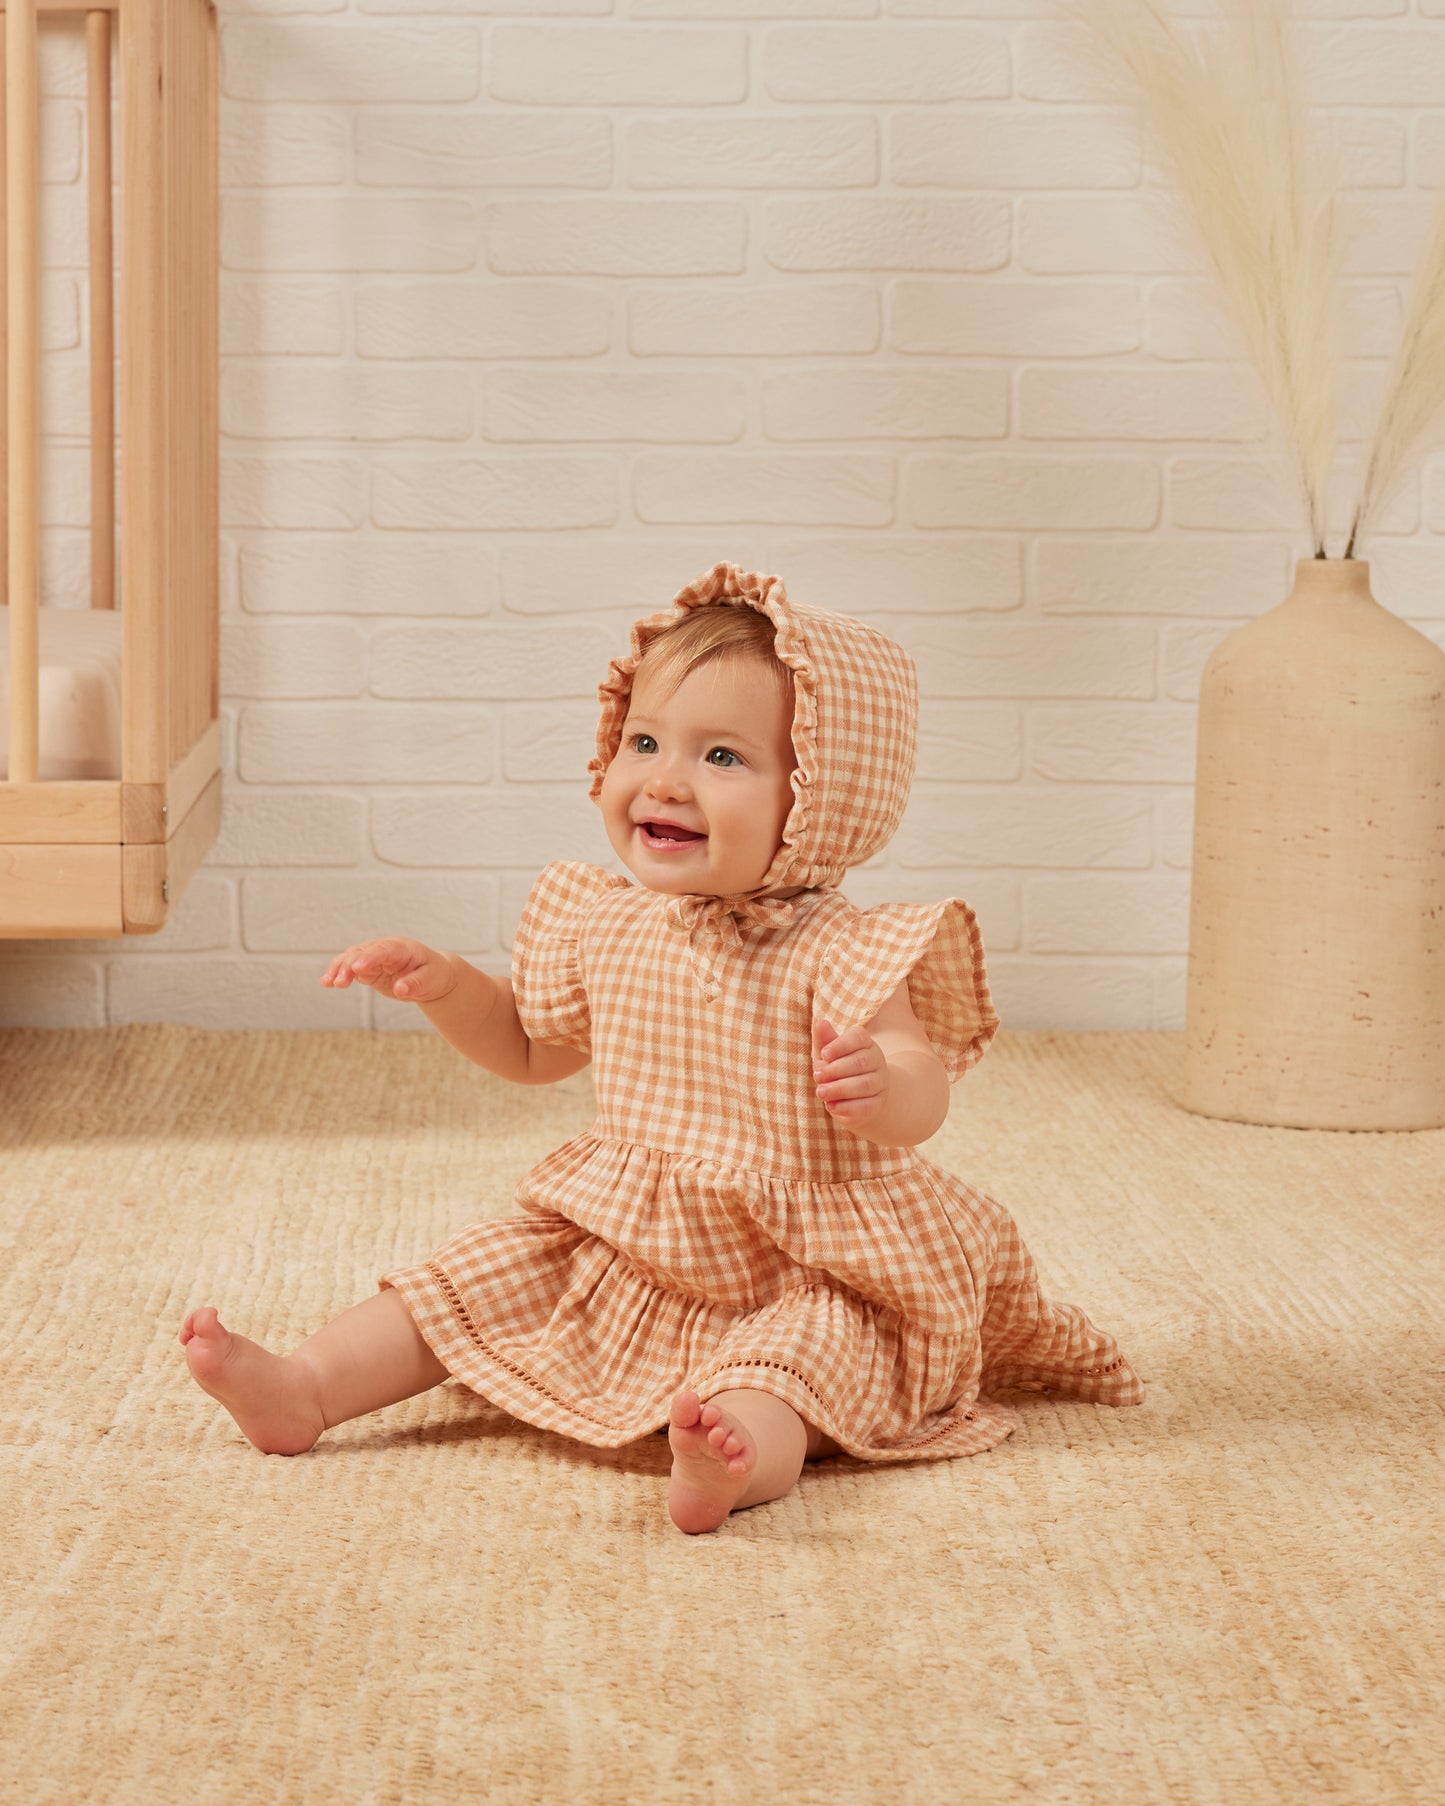 Quincy Mae Lily Dress Gingham Melon